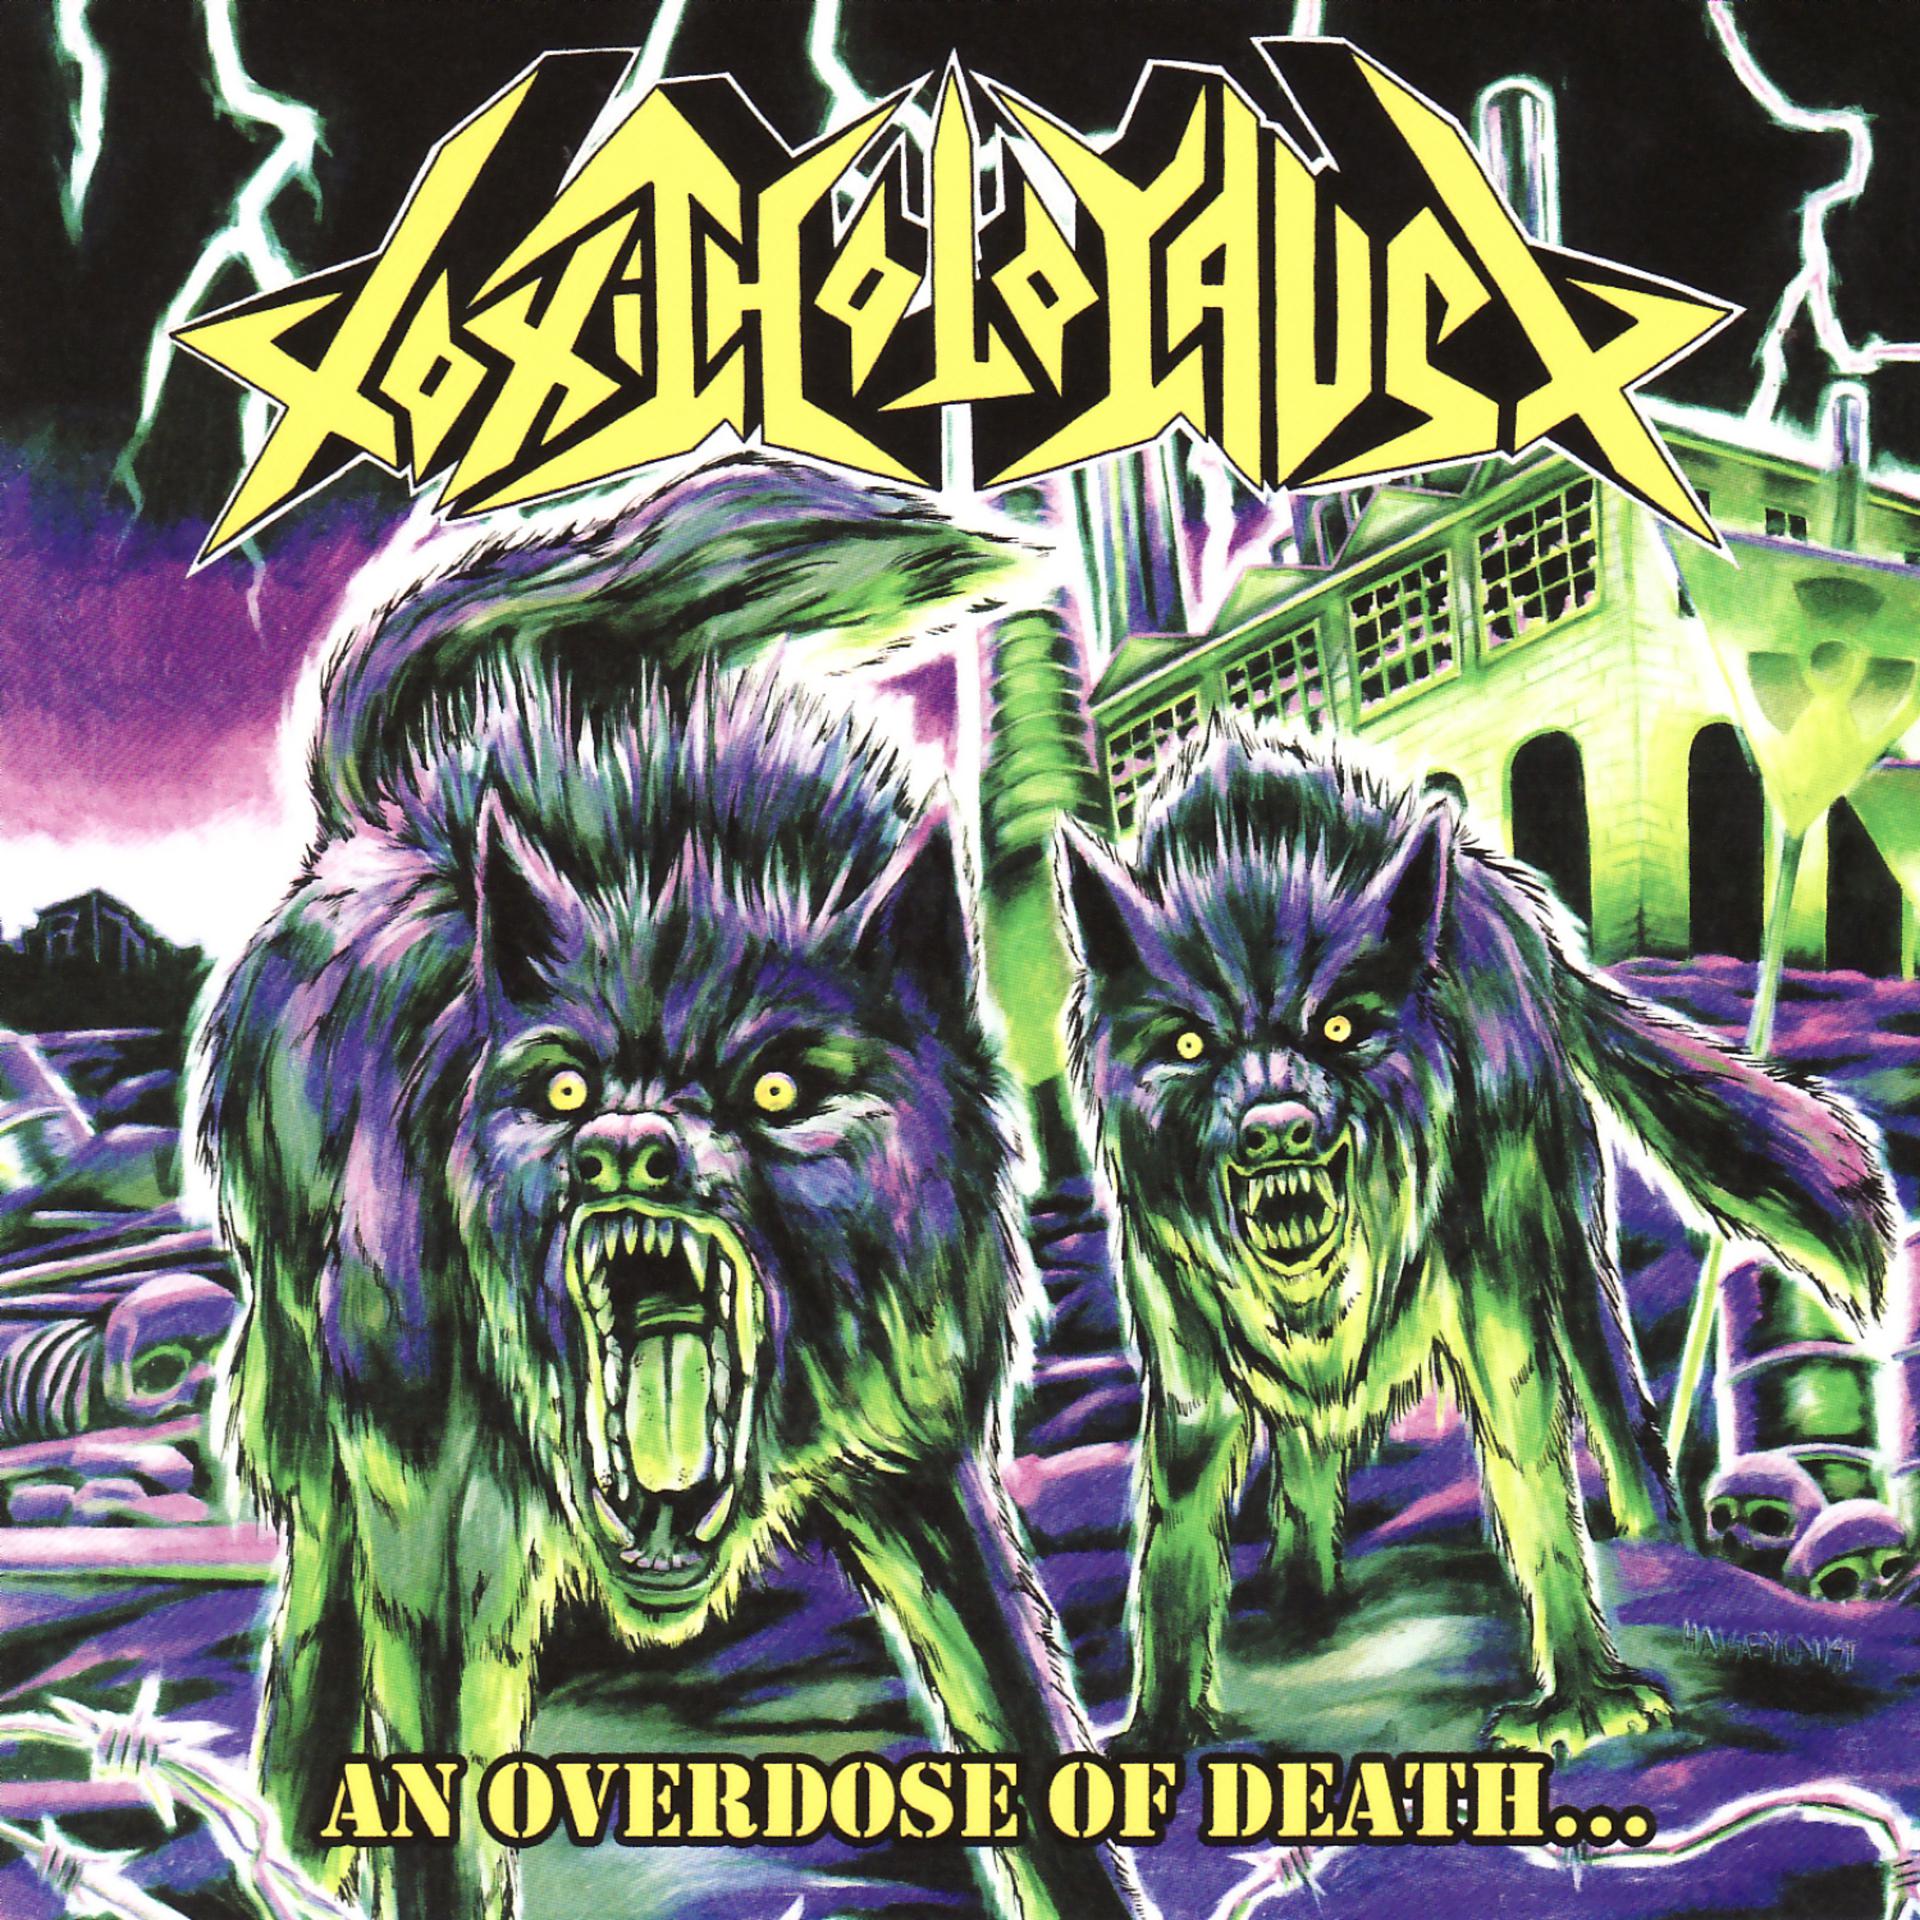 Toxic Holocaust an Overdose of Death. Toxic Holocaust группа. Группа Toxic Holocaust an Overdose of Death. Toxic Holocaust - an Overdose of Death... (2008). Toxic holocaust